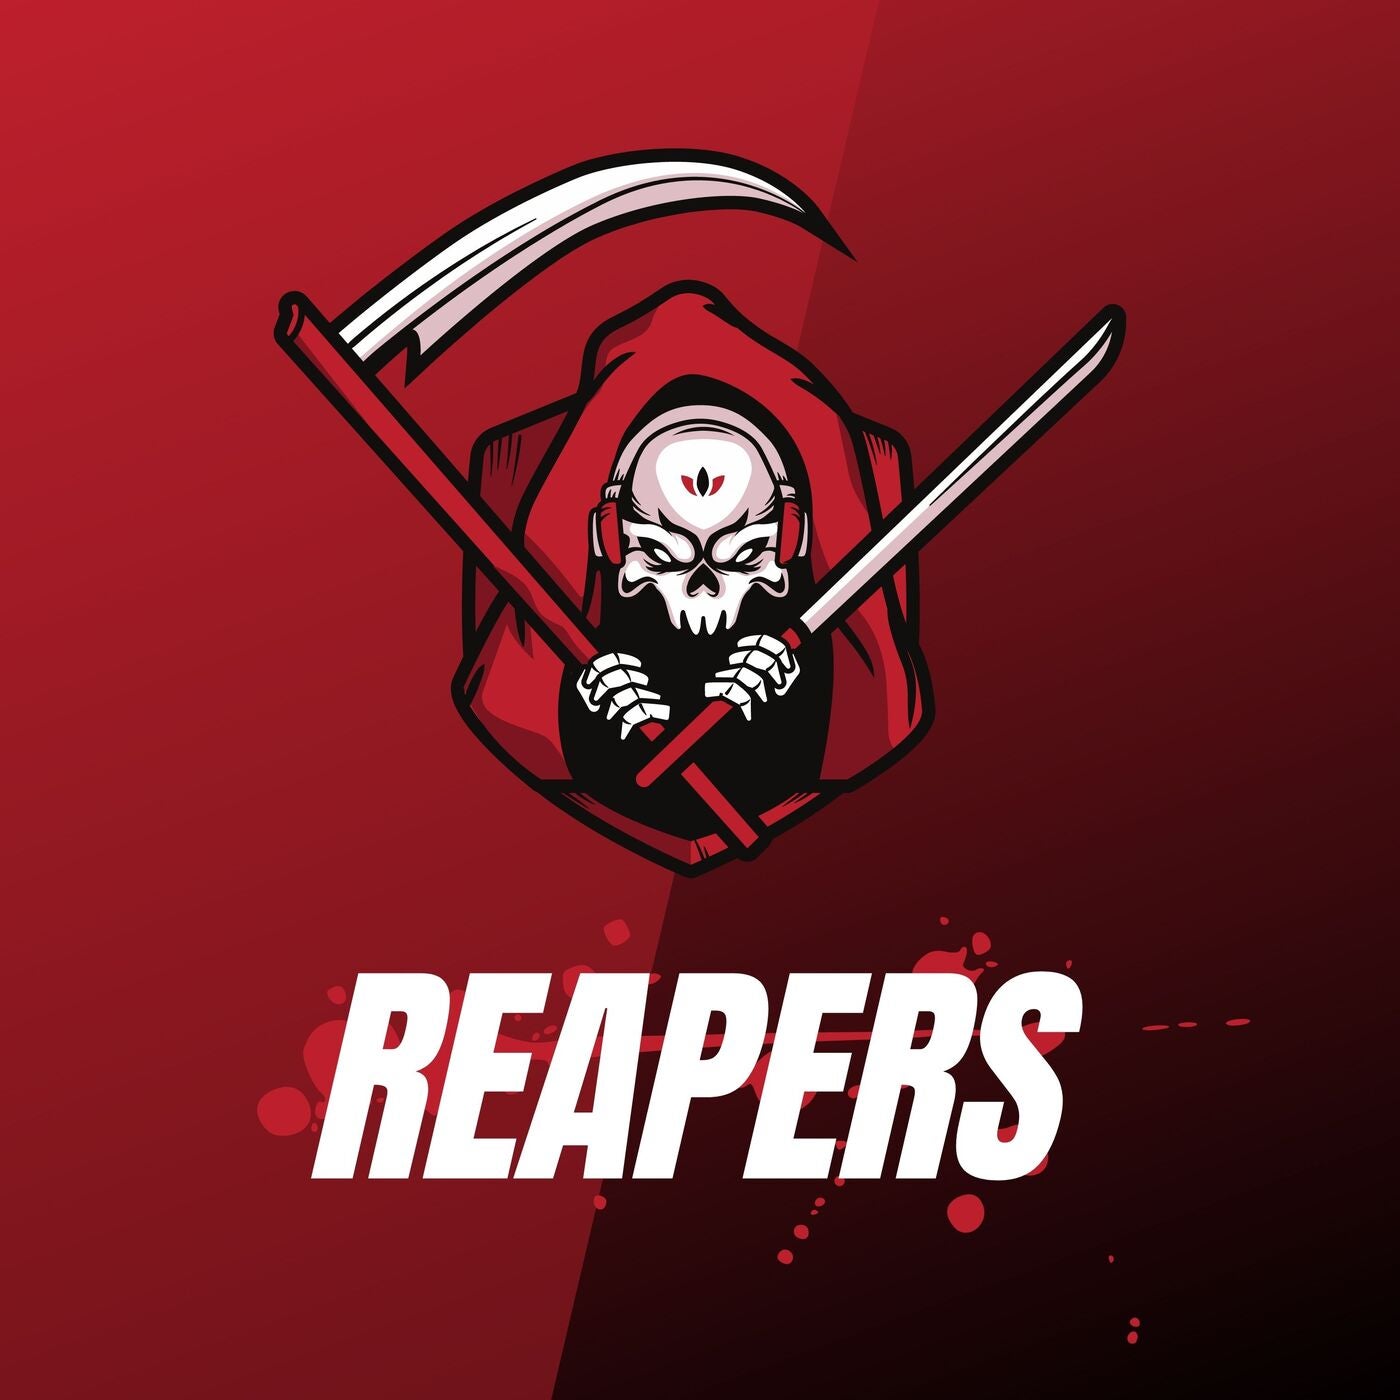 Reapers